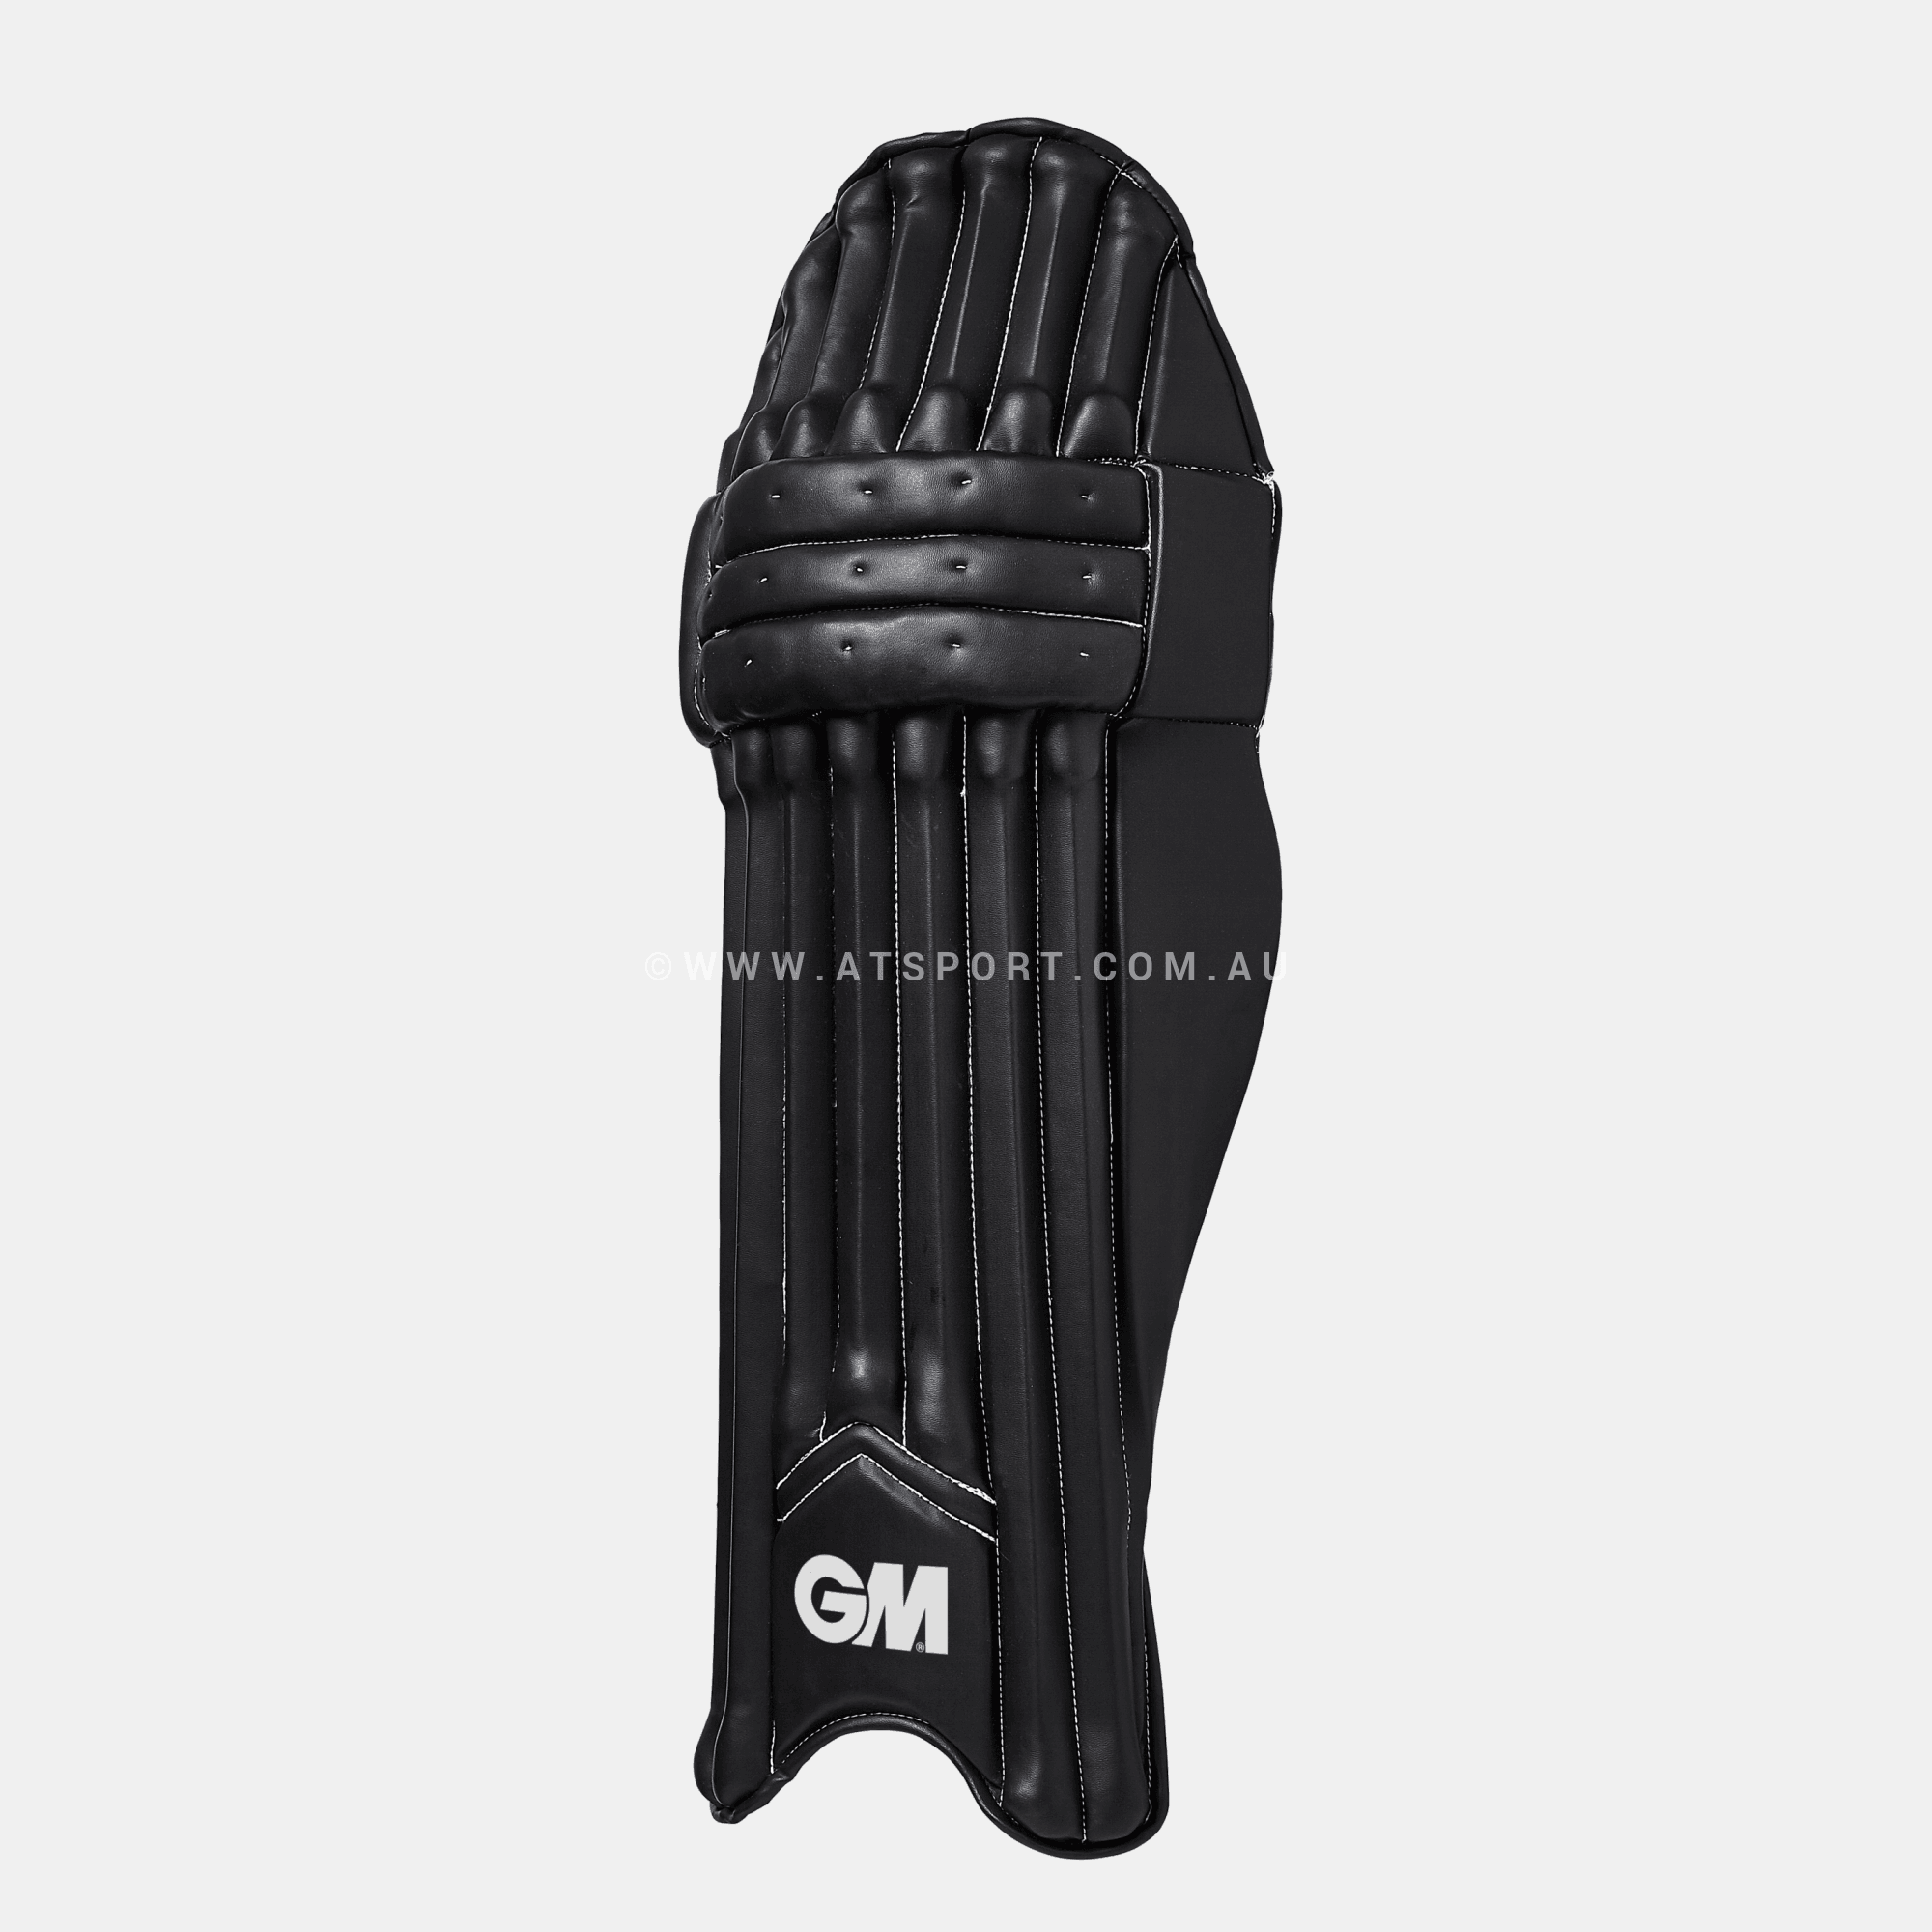 Gm Maxi 606 Coloured Cricket Batting Pads - Adult Adult / Black Right Hand